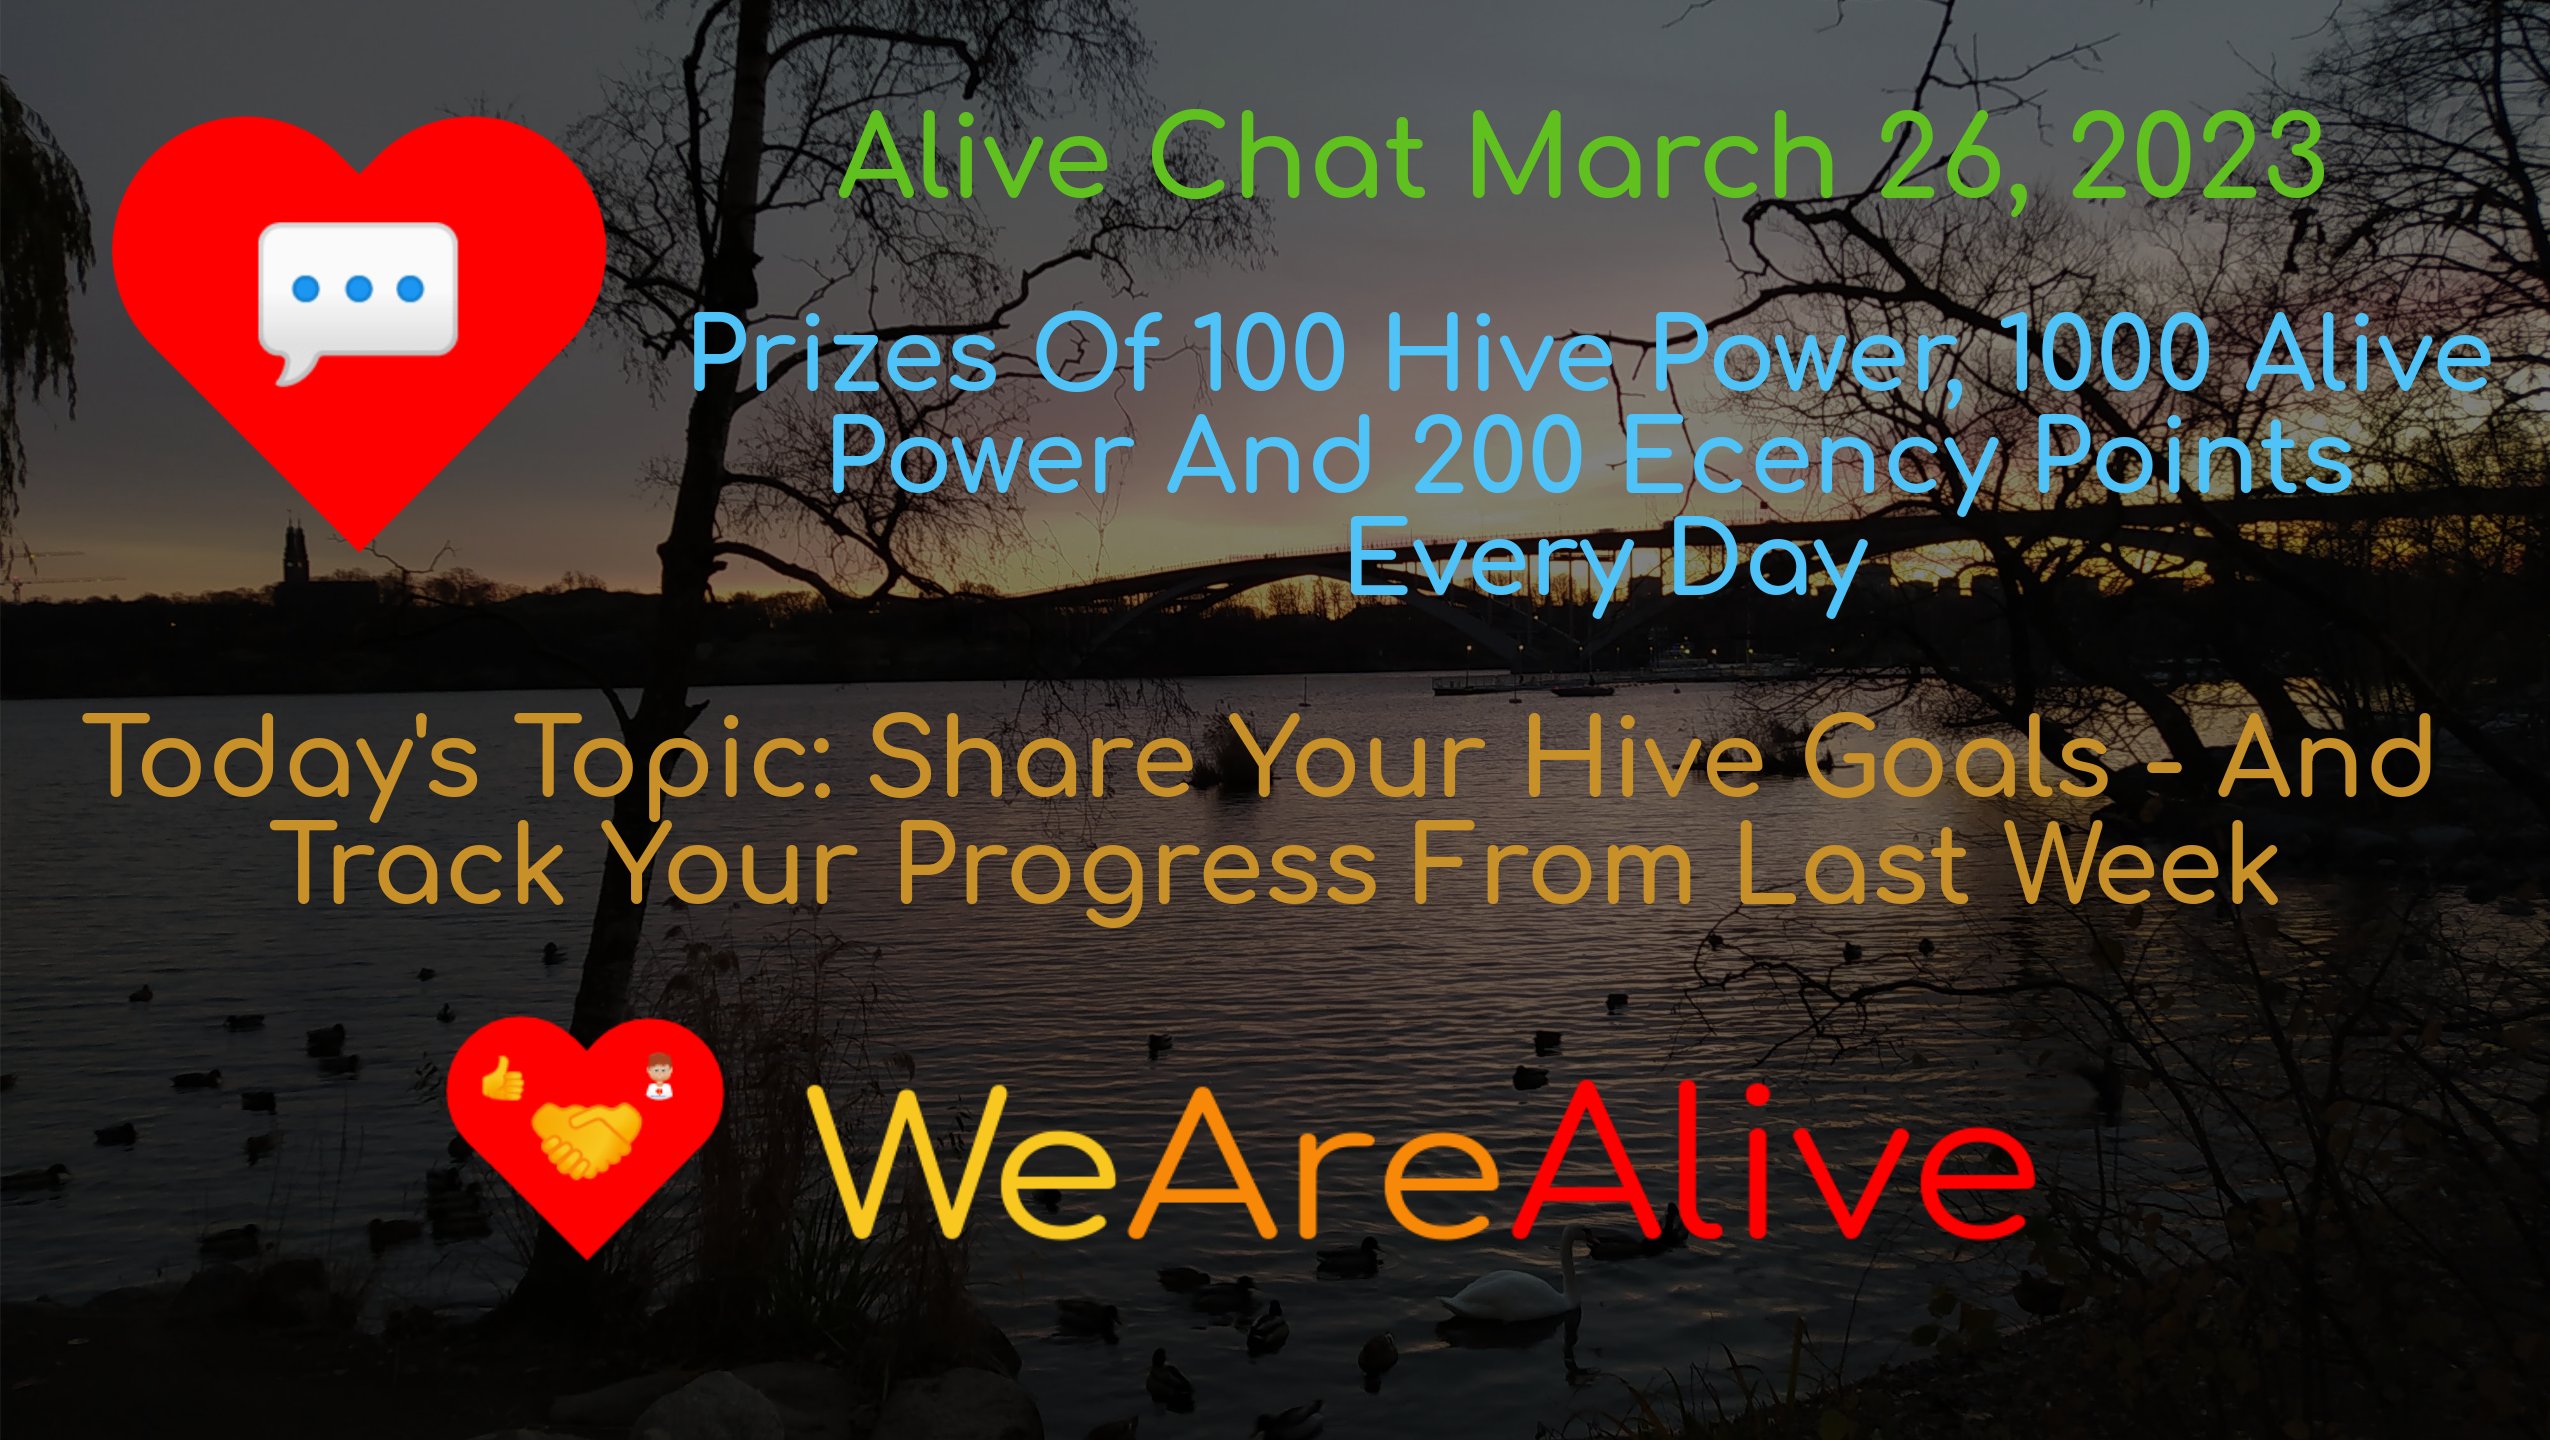 @alive.chat/alive-chat-march-26-2023